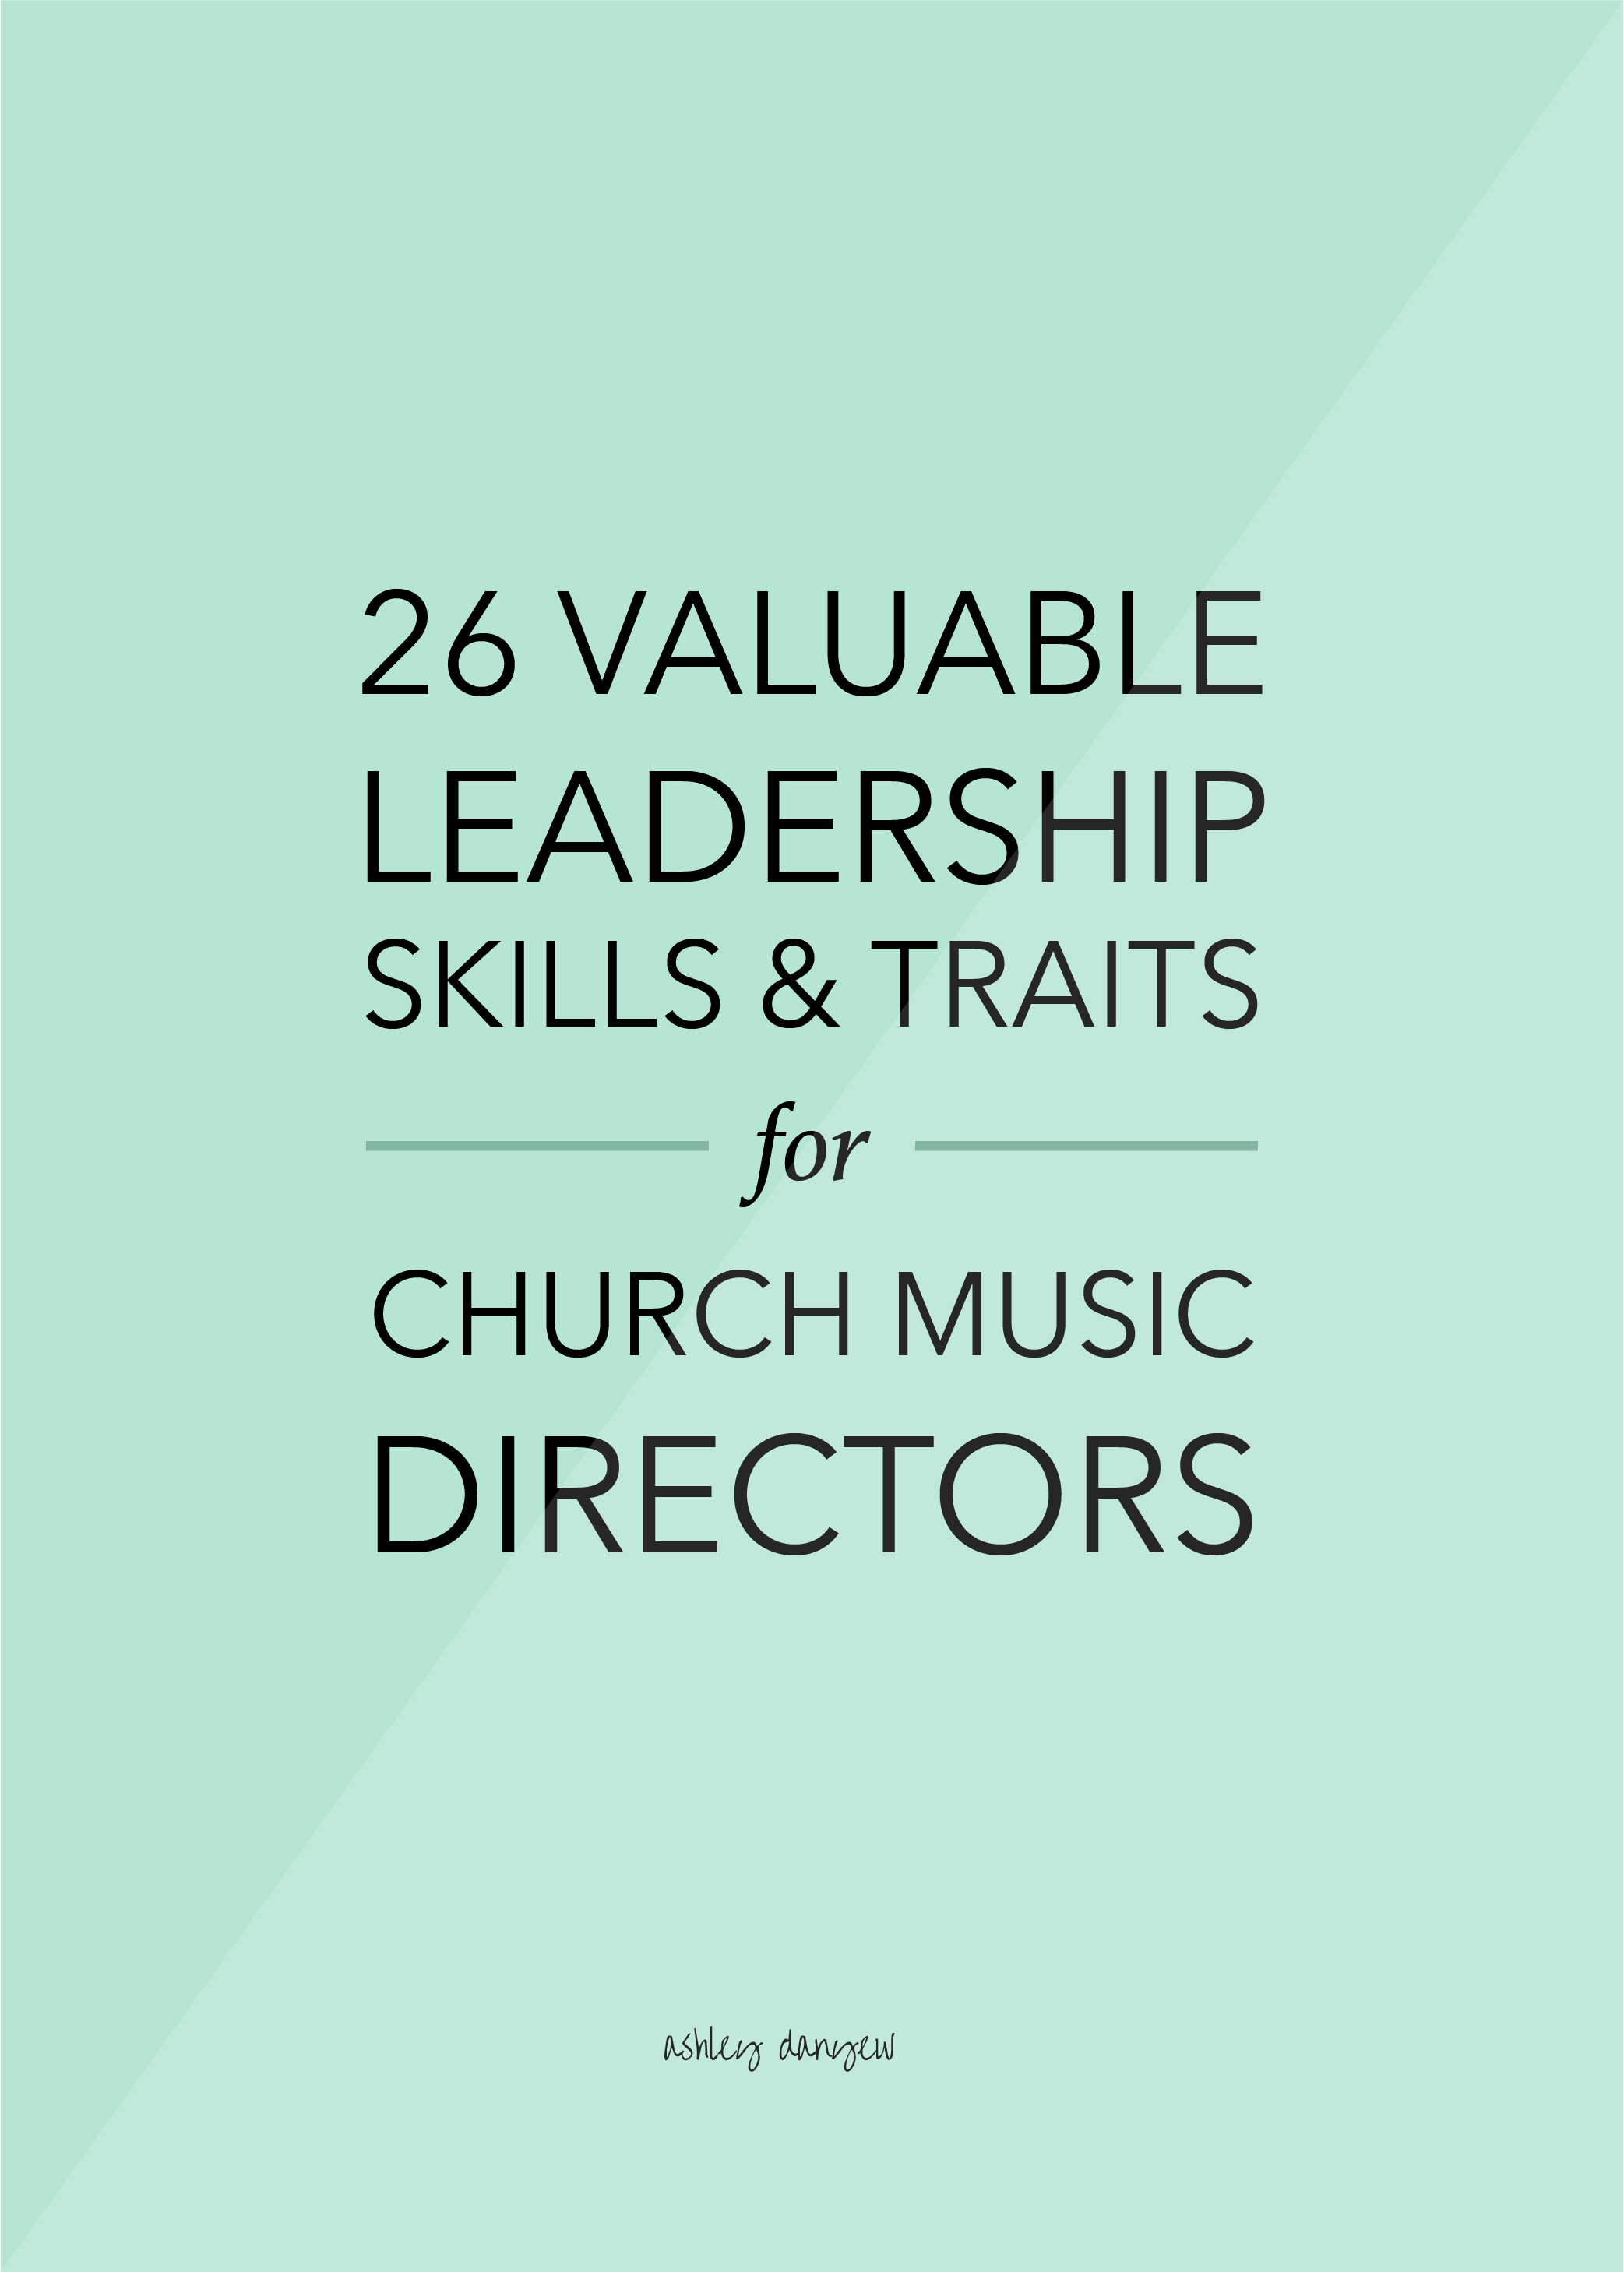 Copy of 26 Valuable Leadership Skills & Traits for Church Music Directors